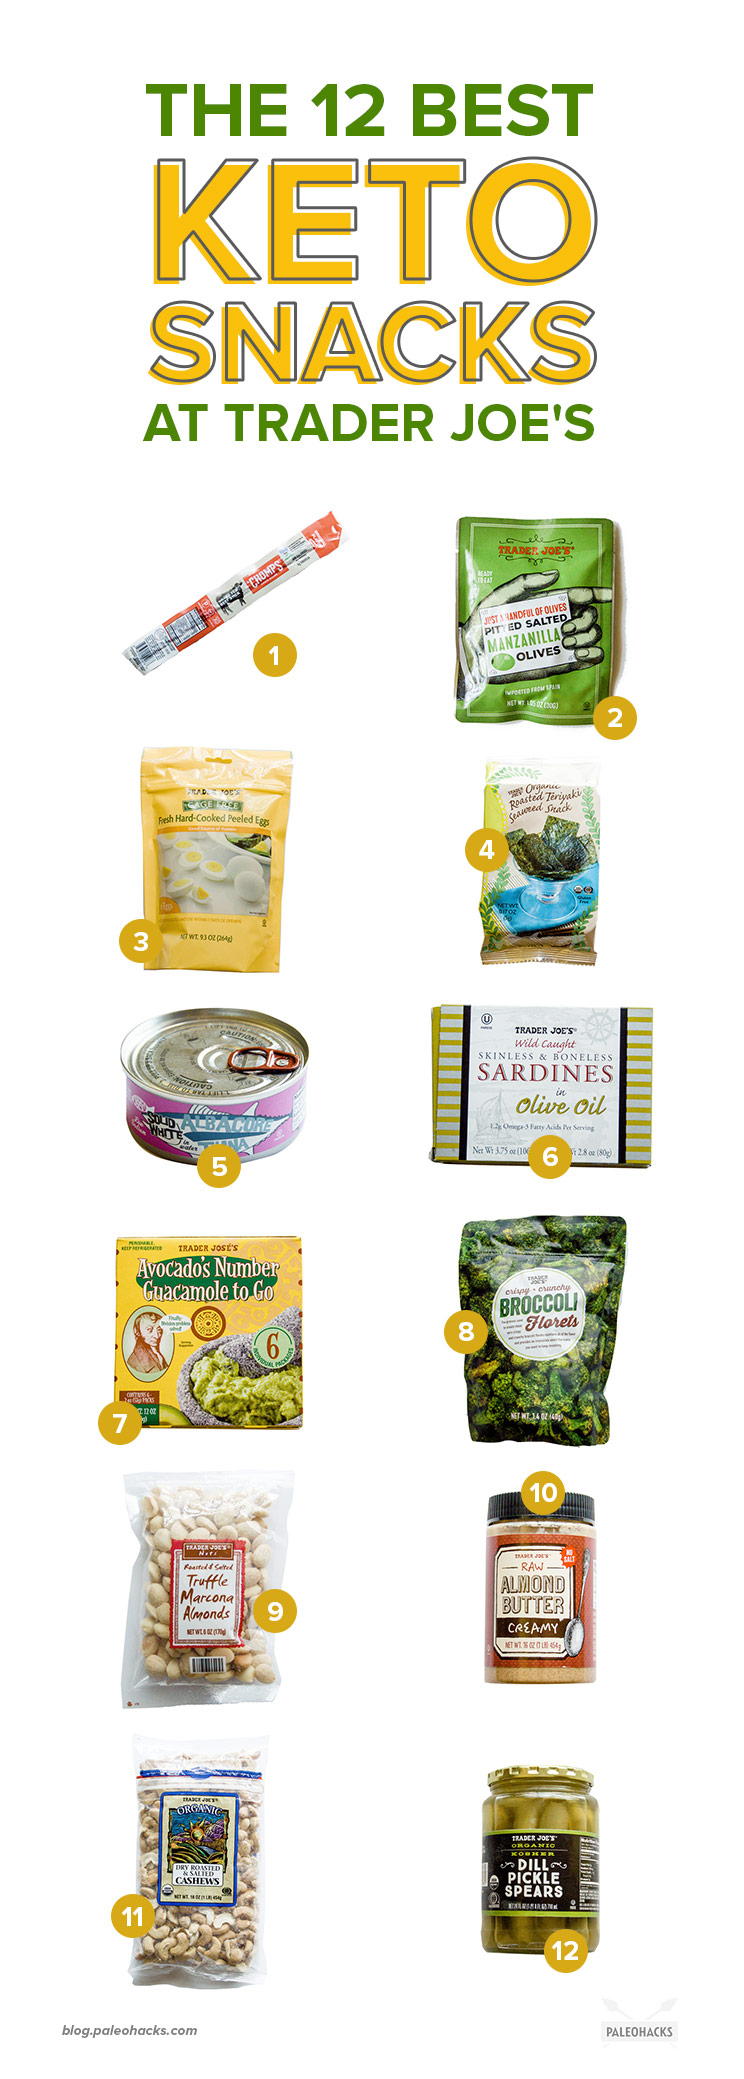 We tried some of Trader Joe’s best low-carb and Paleo-approved snacks so you don’t have to. Read on to see which snacks on the list are worth trying!